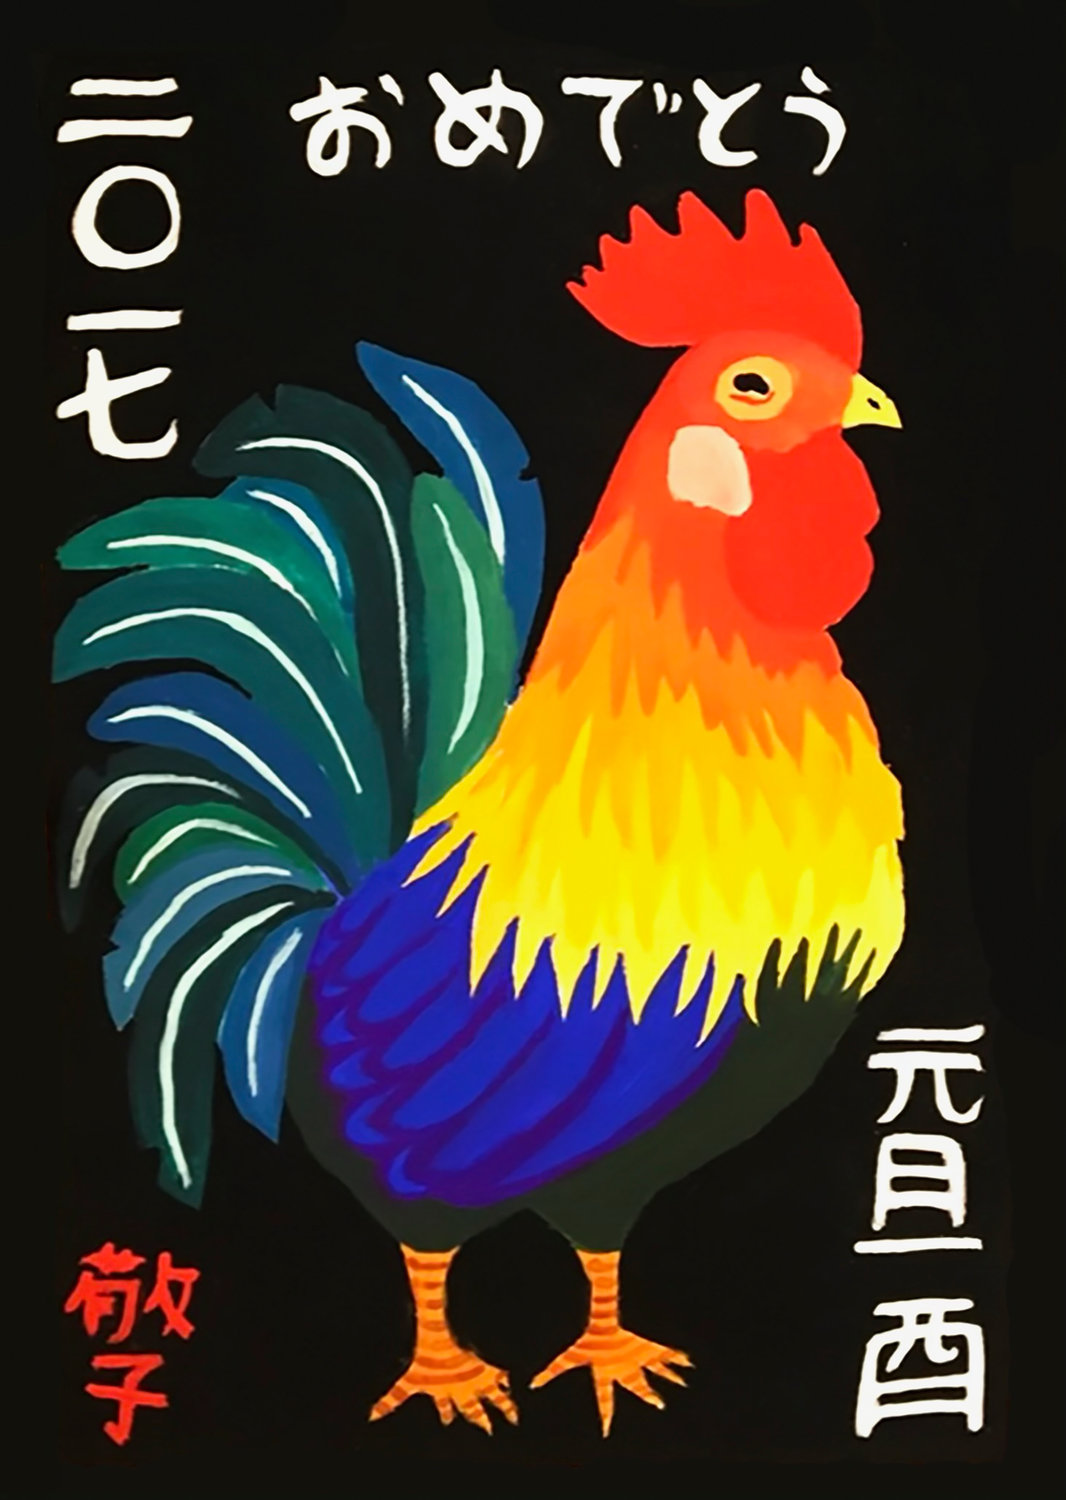 This image provided by Rose Keiko Higa shows a Japanese-style New Year's card. Written in Japanese, the messages on the card say: "Happy New Year, Year of the Rooster, 2017." The card is signed "Keiko" on the bottom left corner. At this time of year, Rose Keiko Higa is making holiday cards for family and friends. An art history major at Oberlin College, in Ohio, she uses cut and layered paper to craft Christmas cards, and paints traditional Japanese New Year's cards on watercolor paper. (Rose Keiko Higa via AP)